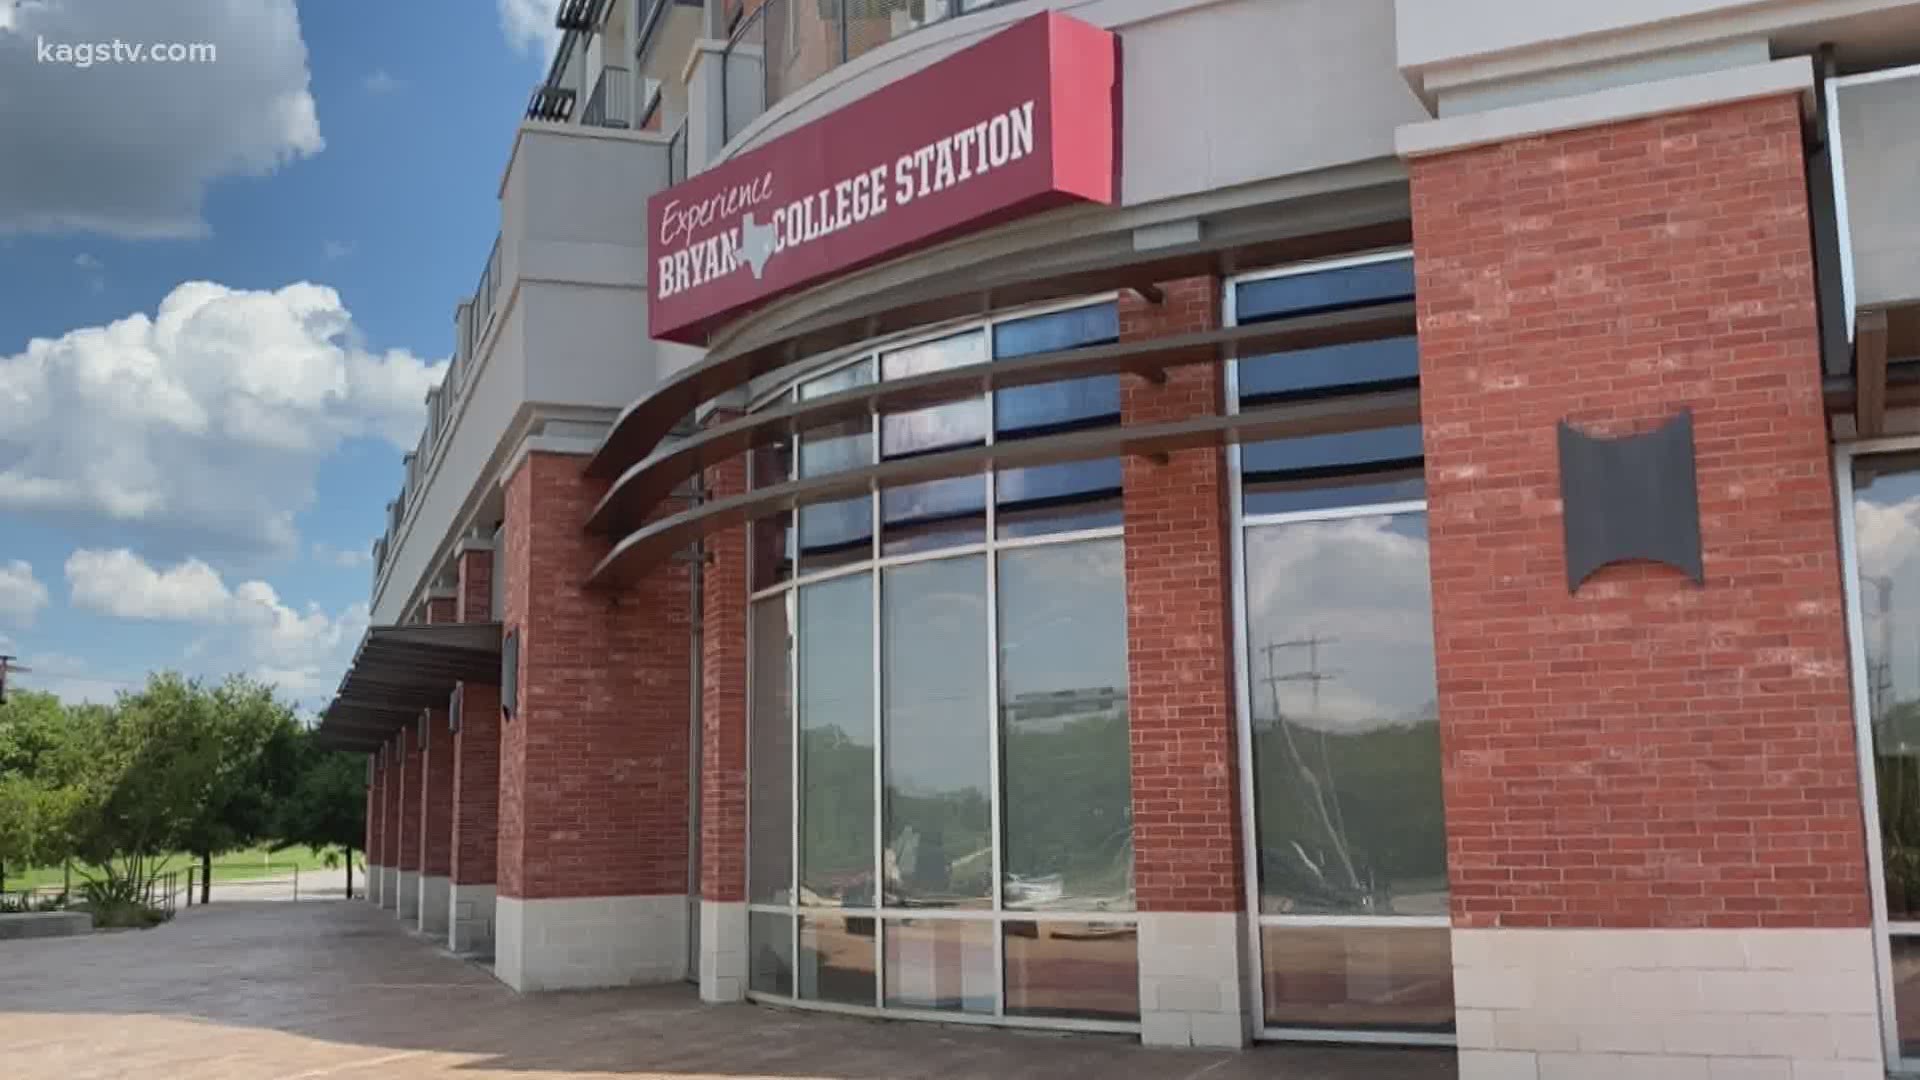 City of College Station exits tourism partnership with Bryan